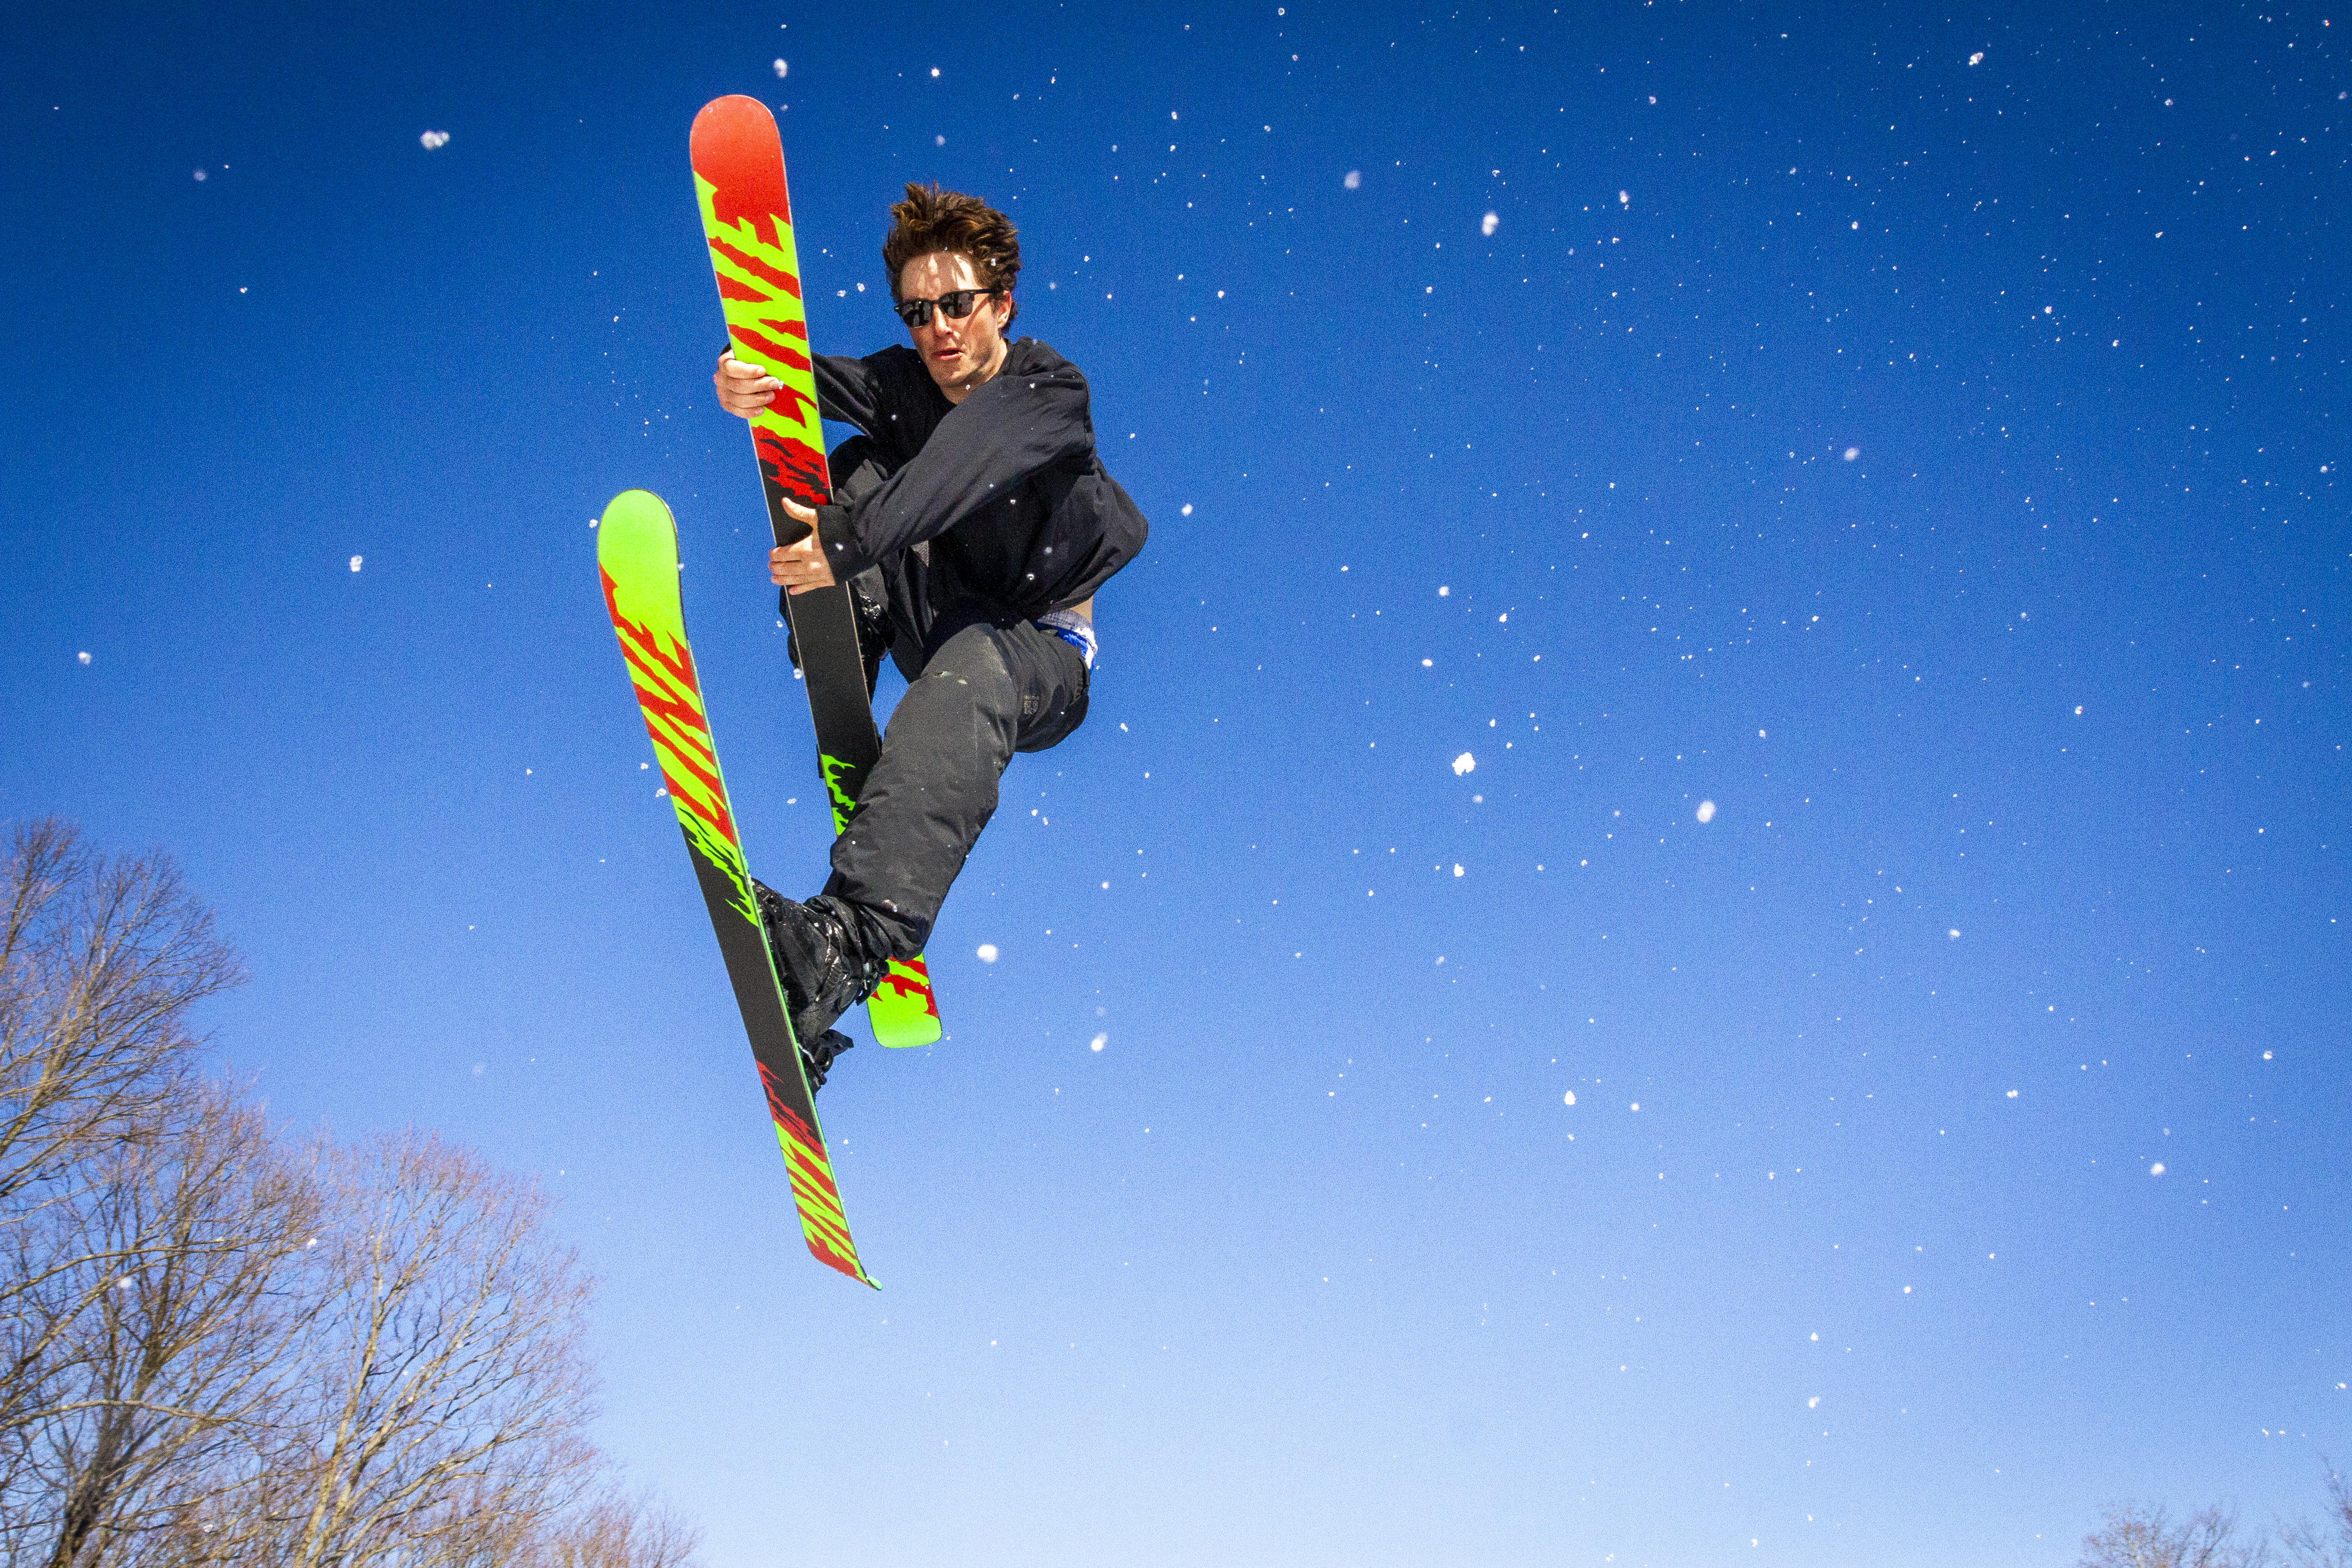 Mikey MacKnight grabs his ski as he airs of the last jump at Labrador Mountain in Truxon, New York. Mikey grew up skiing in the Syracuse, New York area and is one of the better local riders.